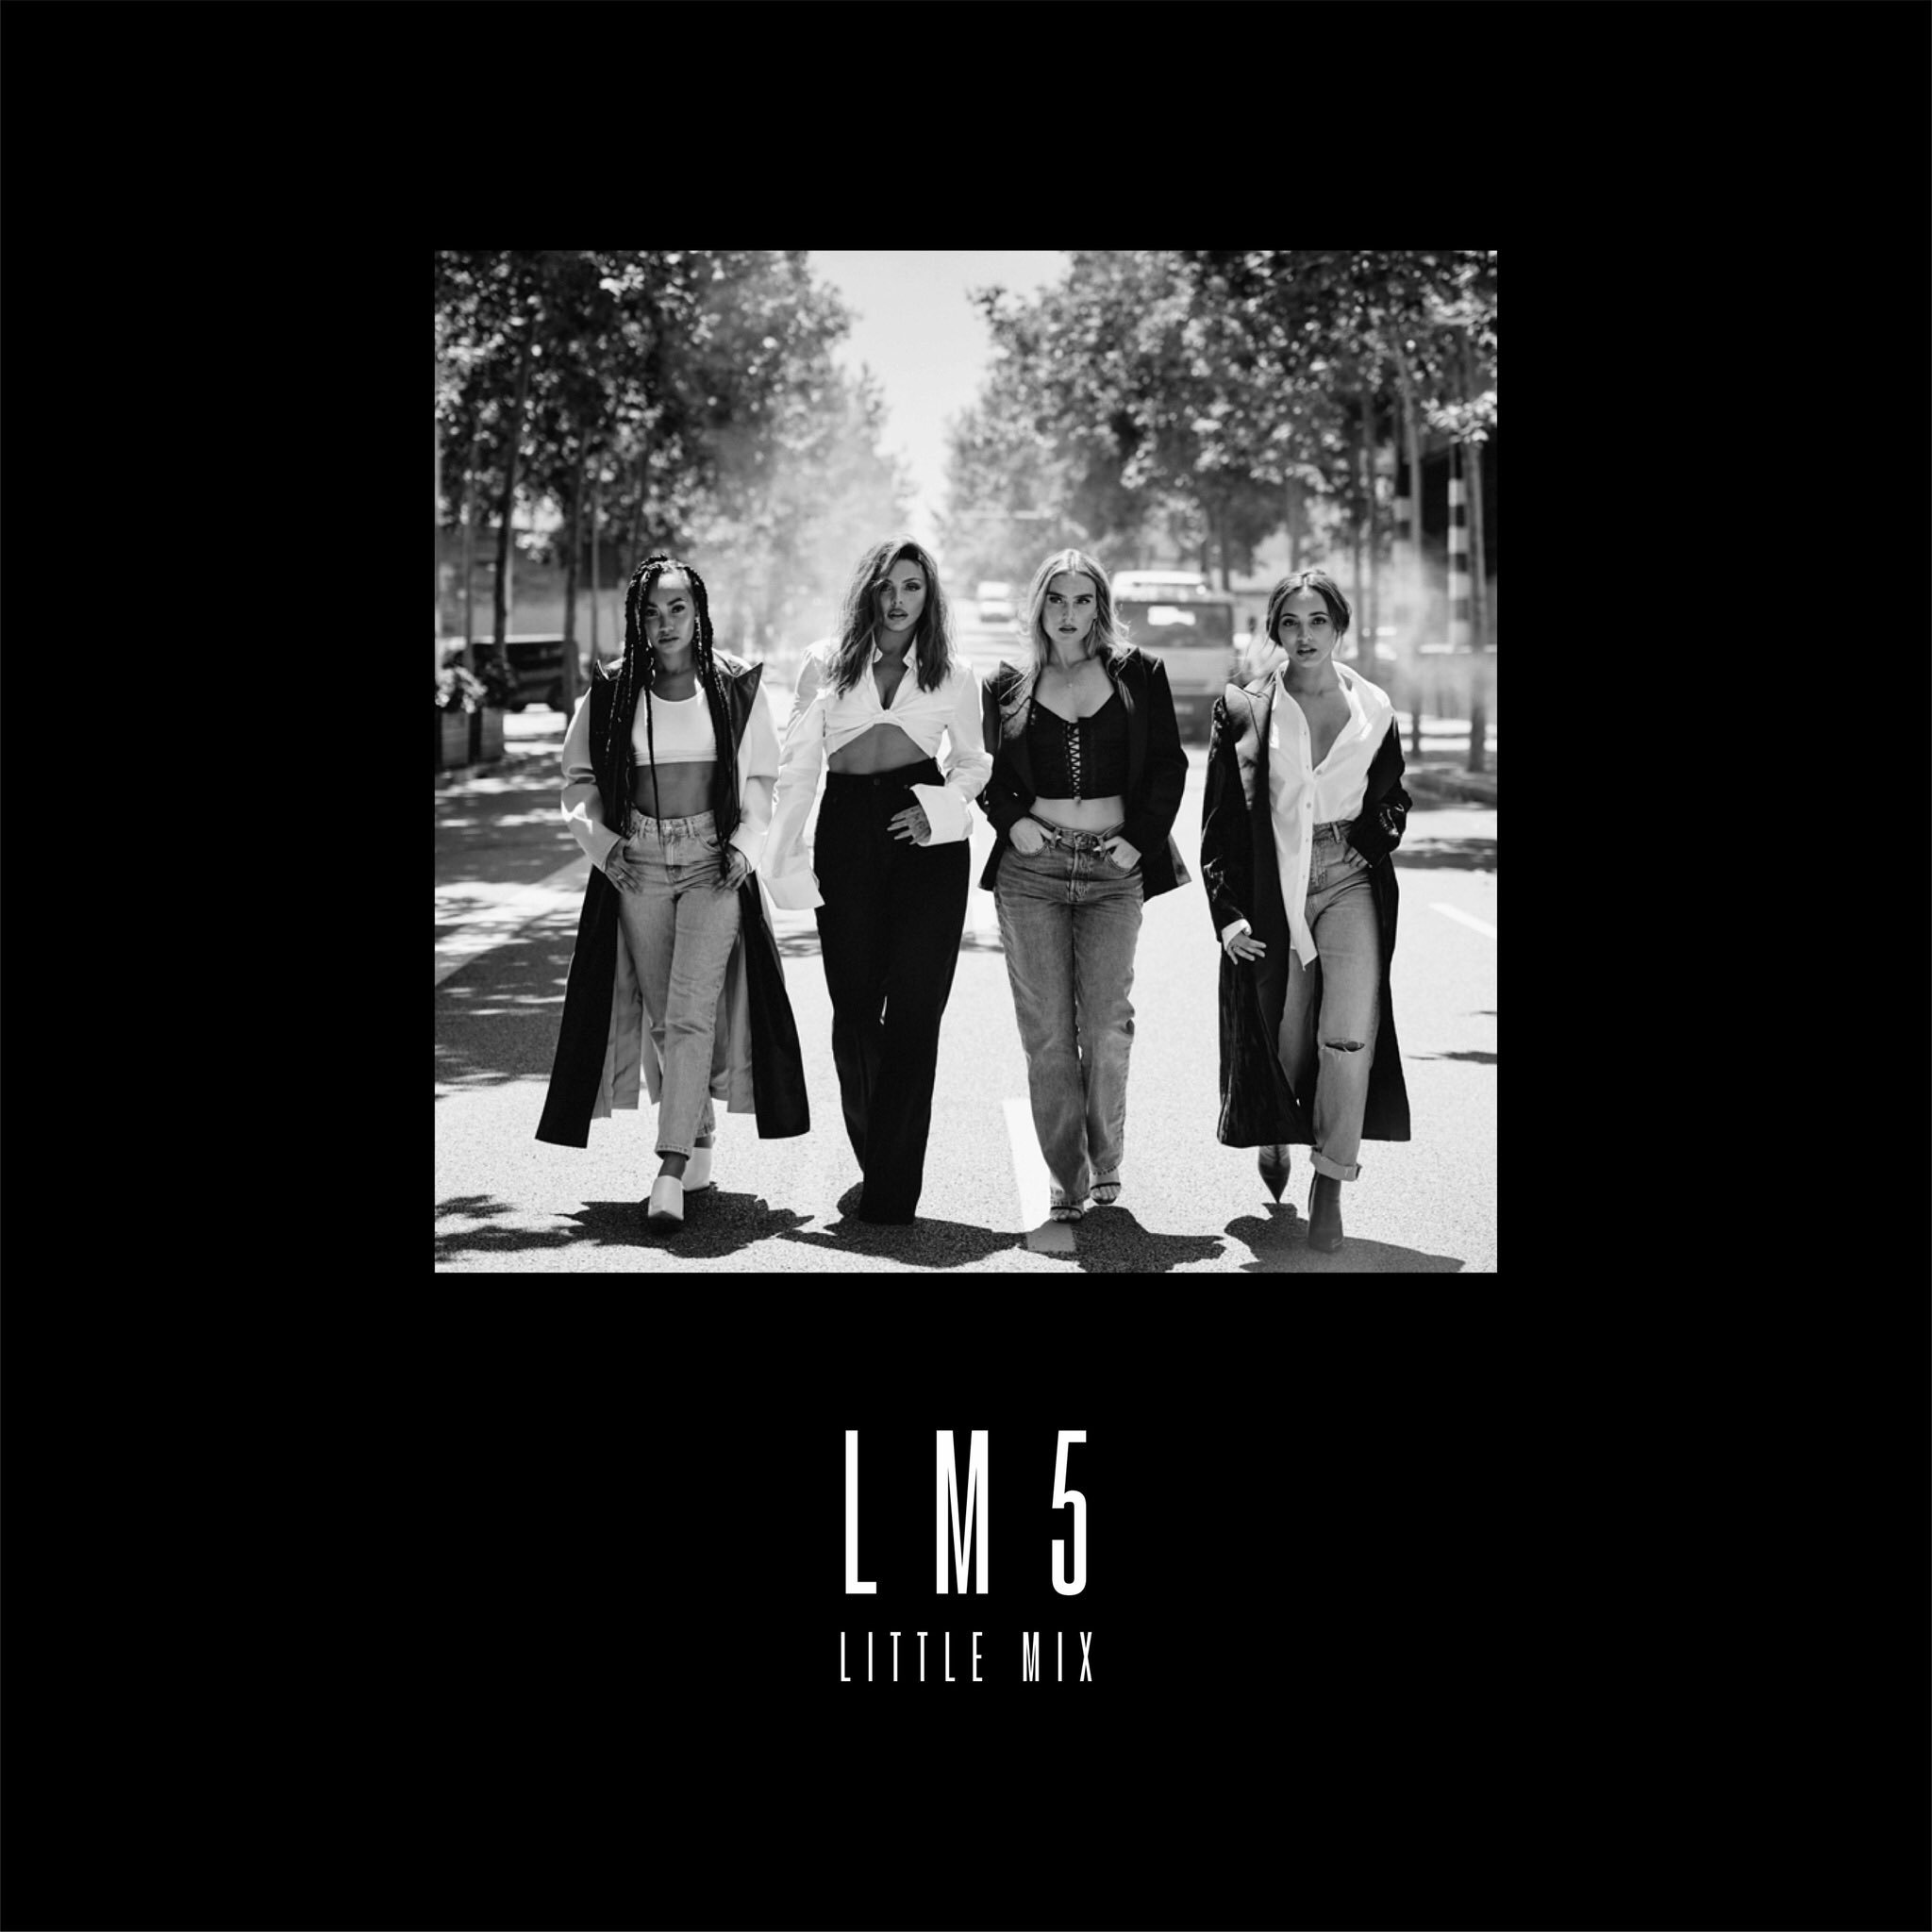 Little Mix - LM5 album cover (Deluxe Edition)